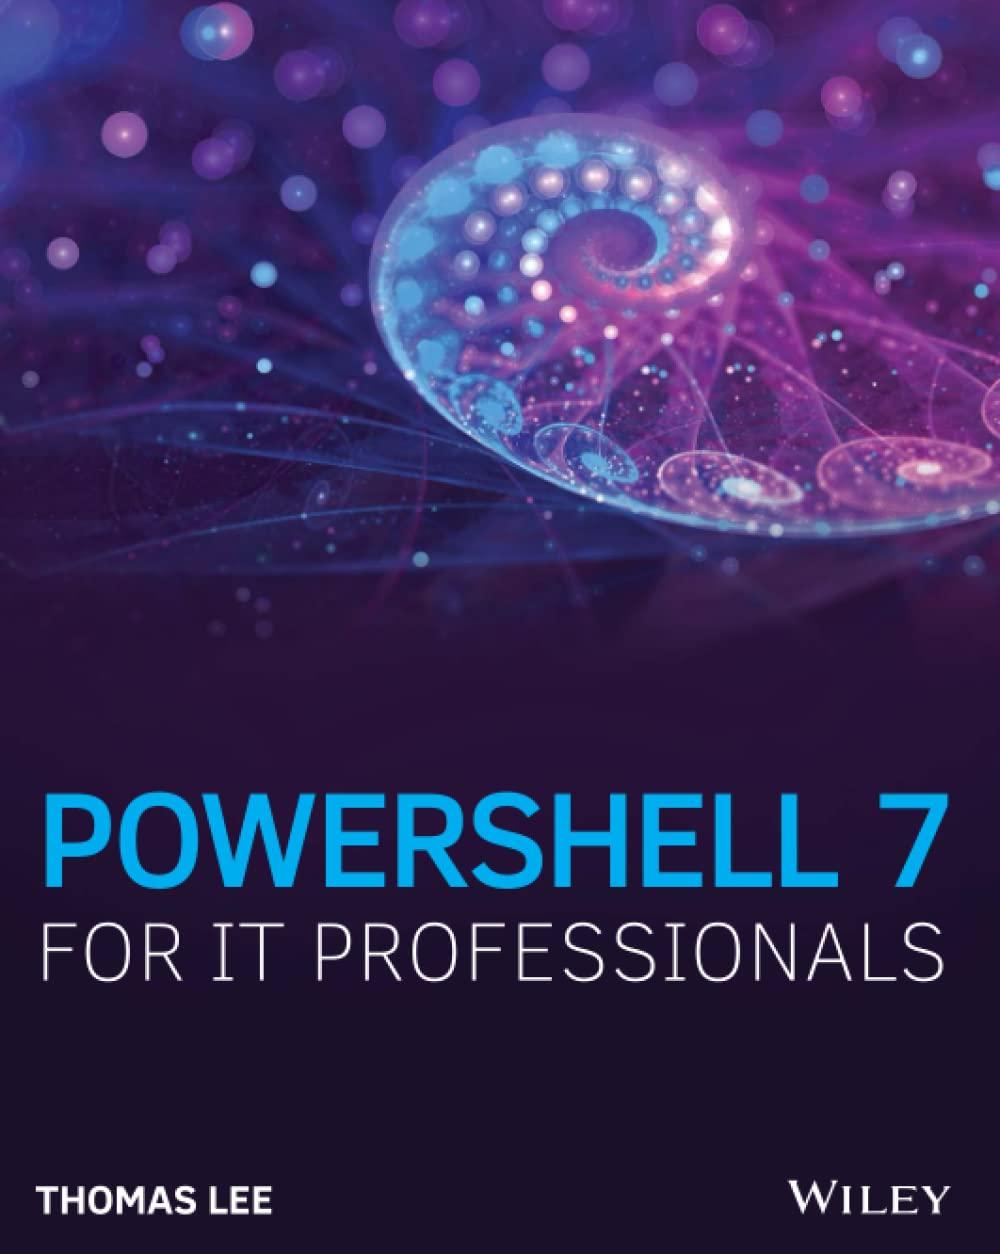 powershell 7 for it professionals 1st edition thomas lee 1119644720, 978-1119644729